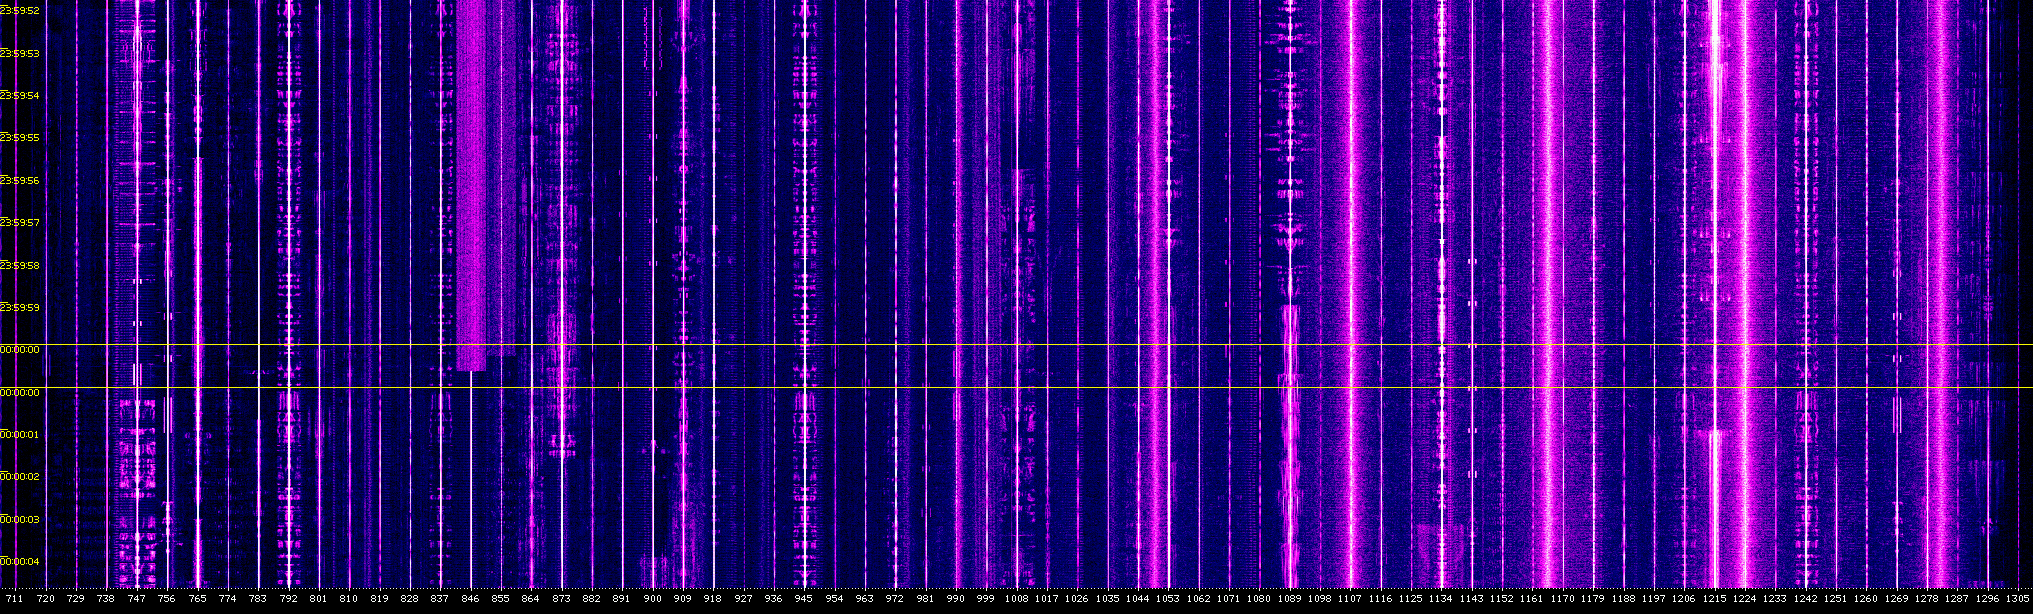 [waterfall showing the longwave broadcast band]